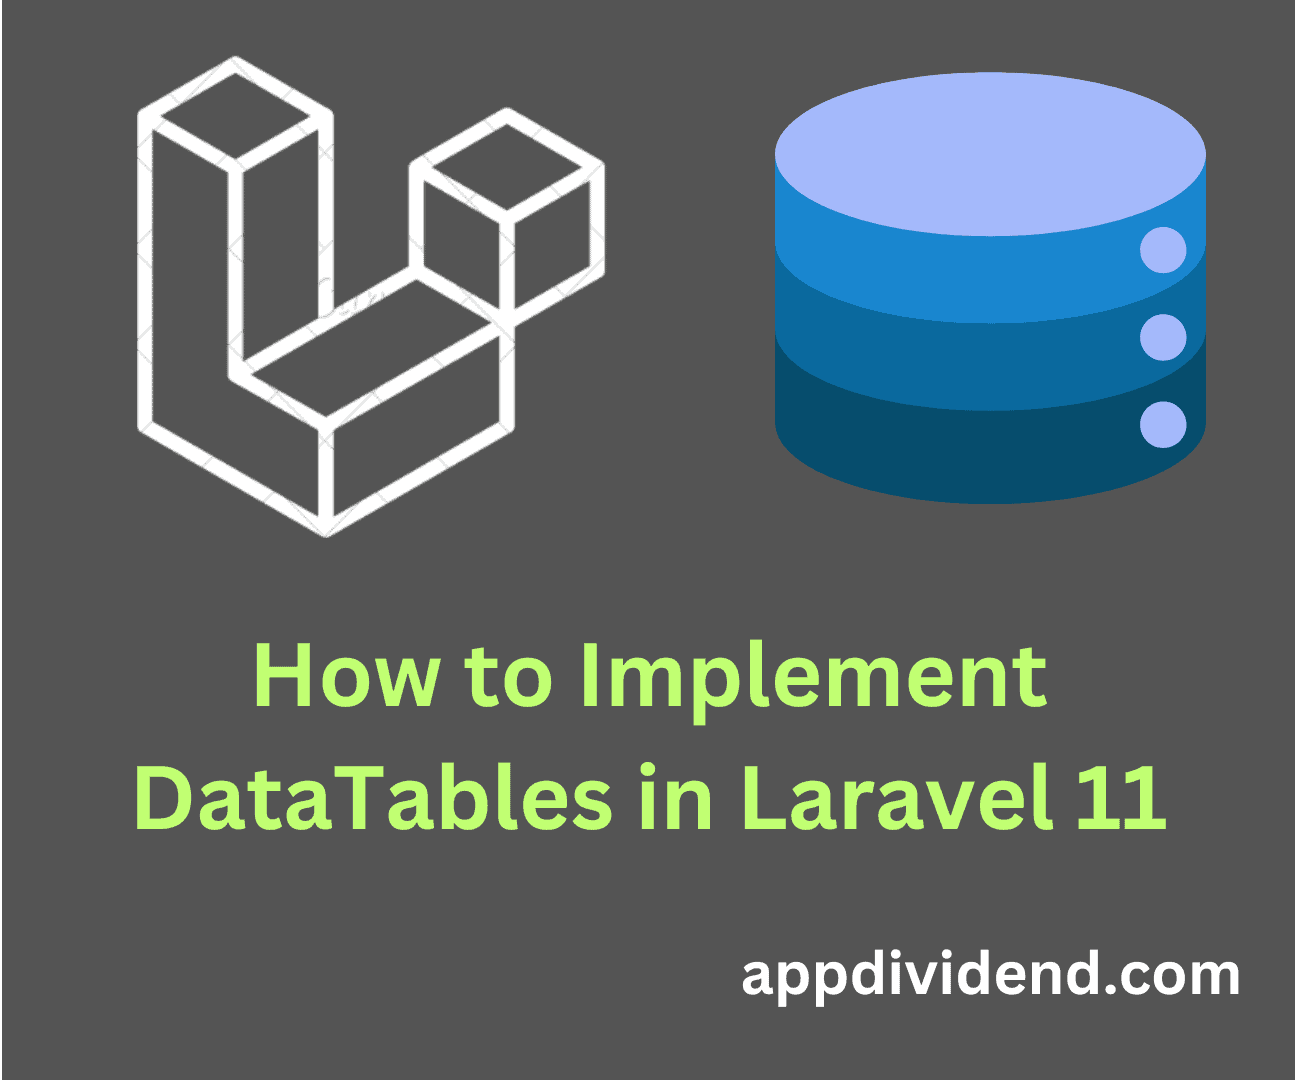 How to Implement DataTables in Laravel 11